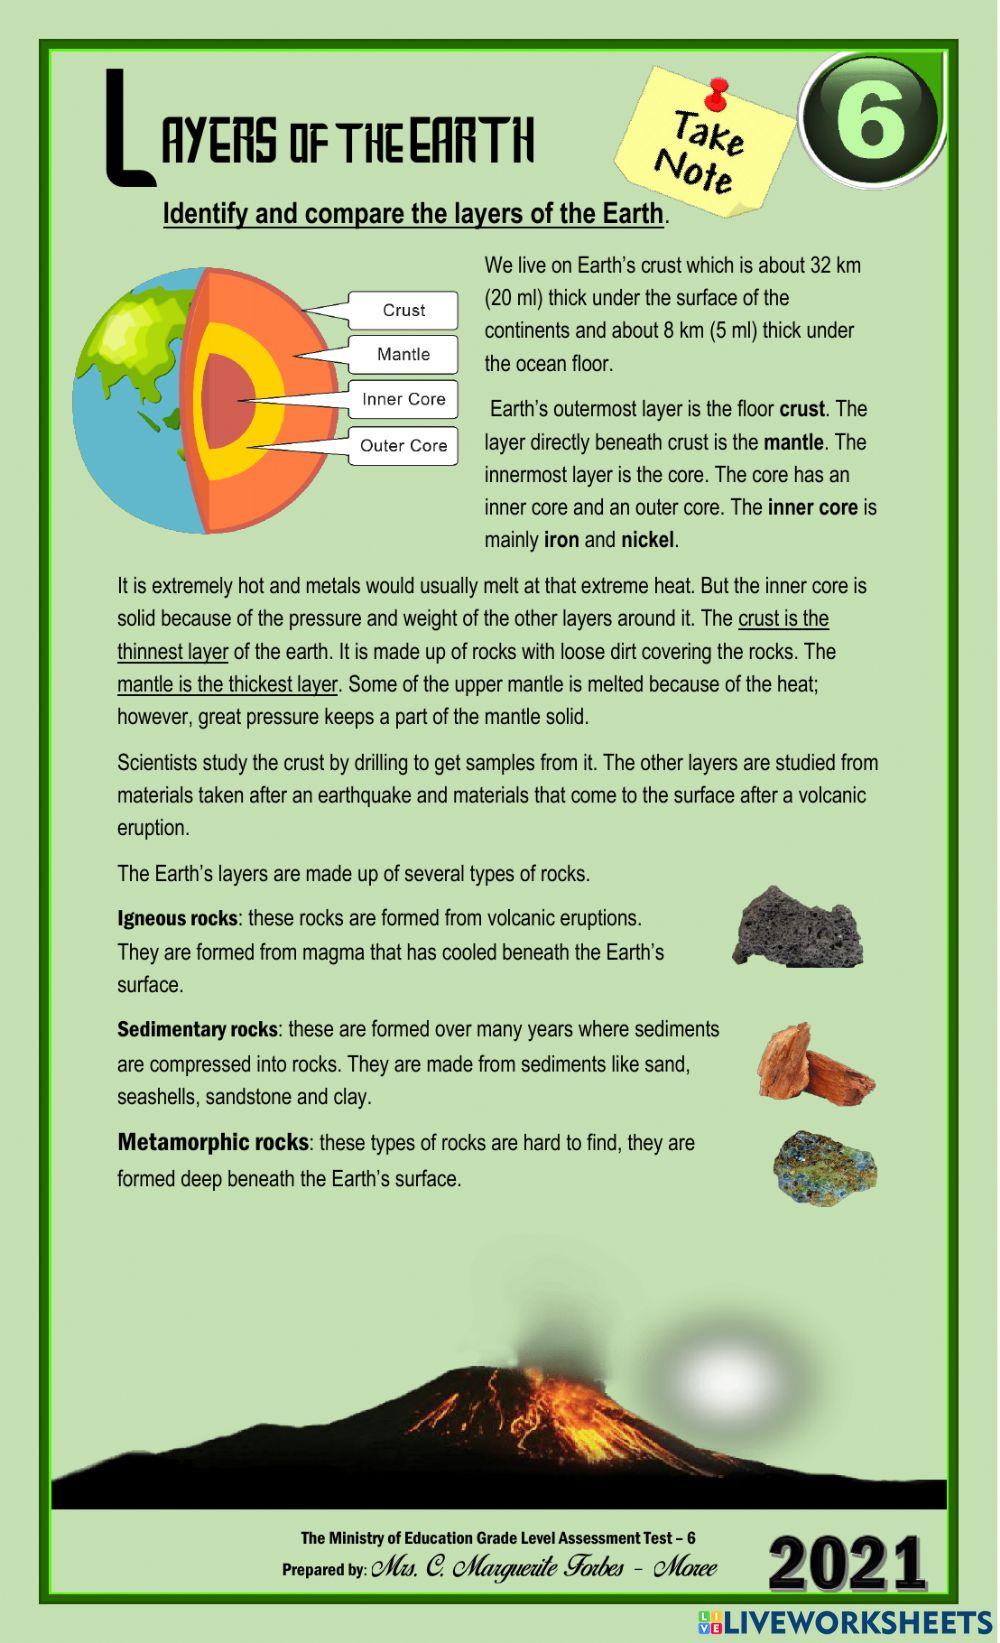 The Layers of the Earth - NOTES